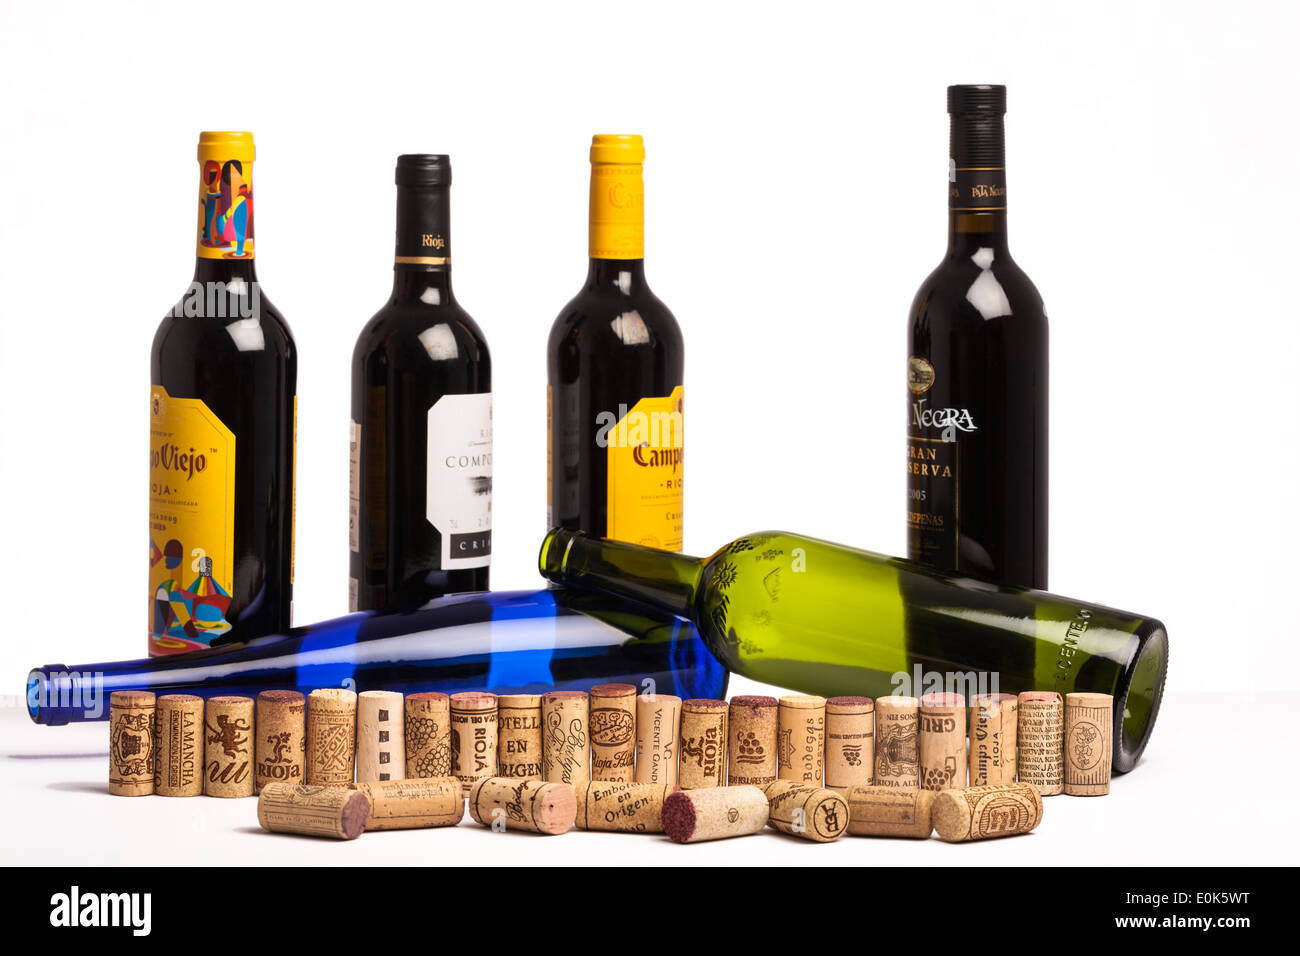 Corks and wine bottles from different Spanish wine growing regions.On white background, Concept for varieties of Spanish wines. Stock Photo